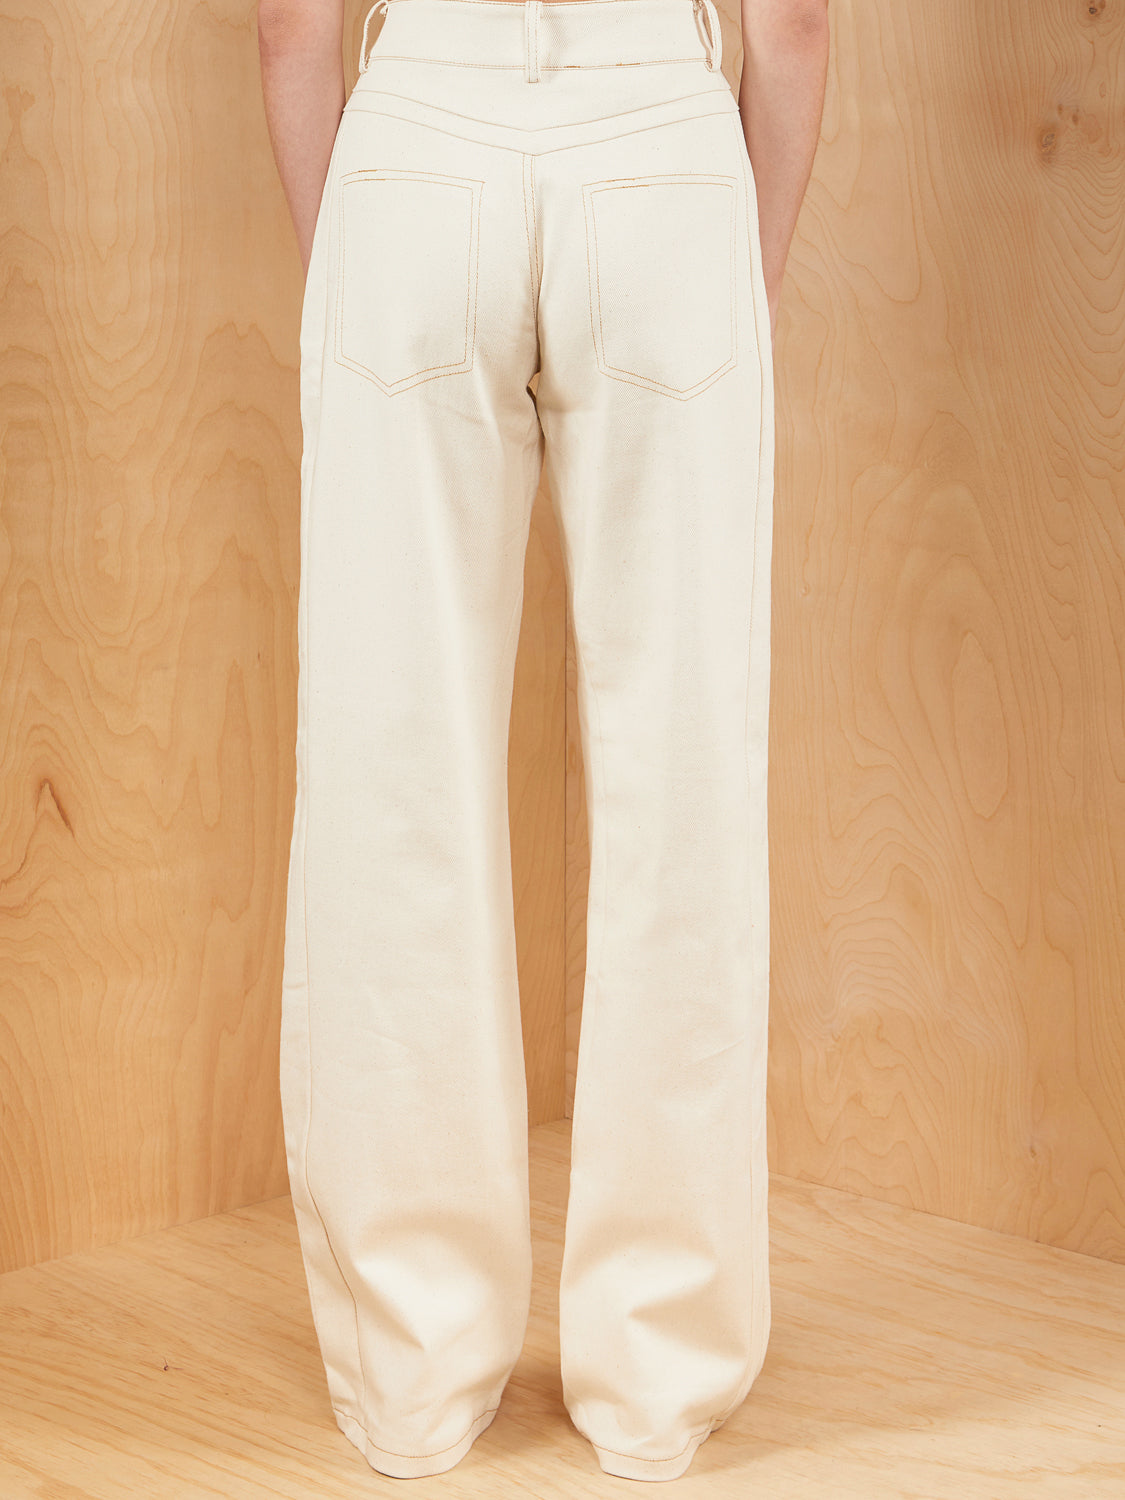 I.AM.GIA High Waisted Pant in Natural